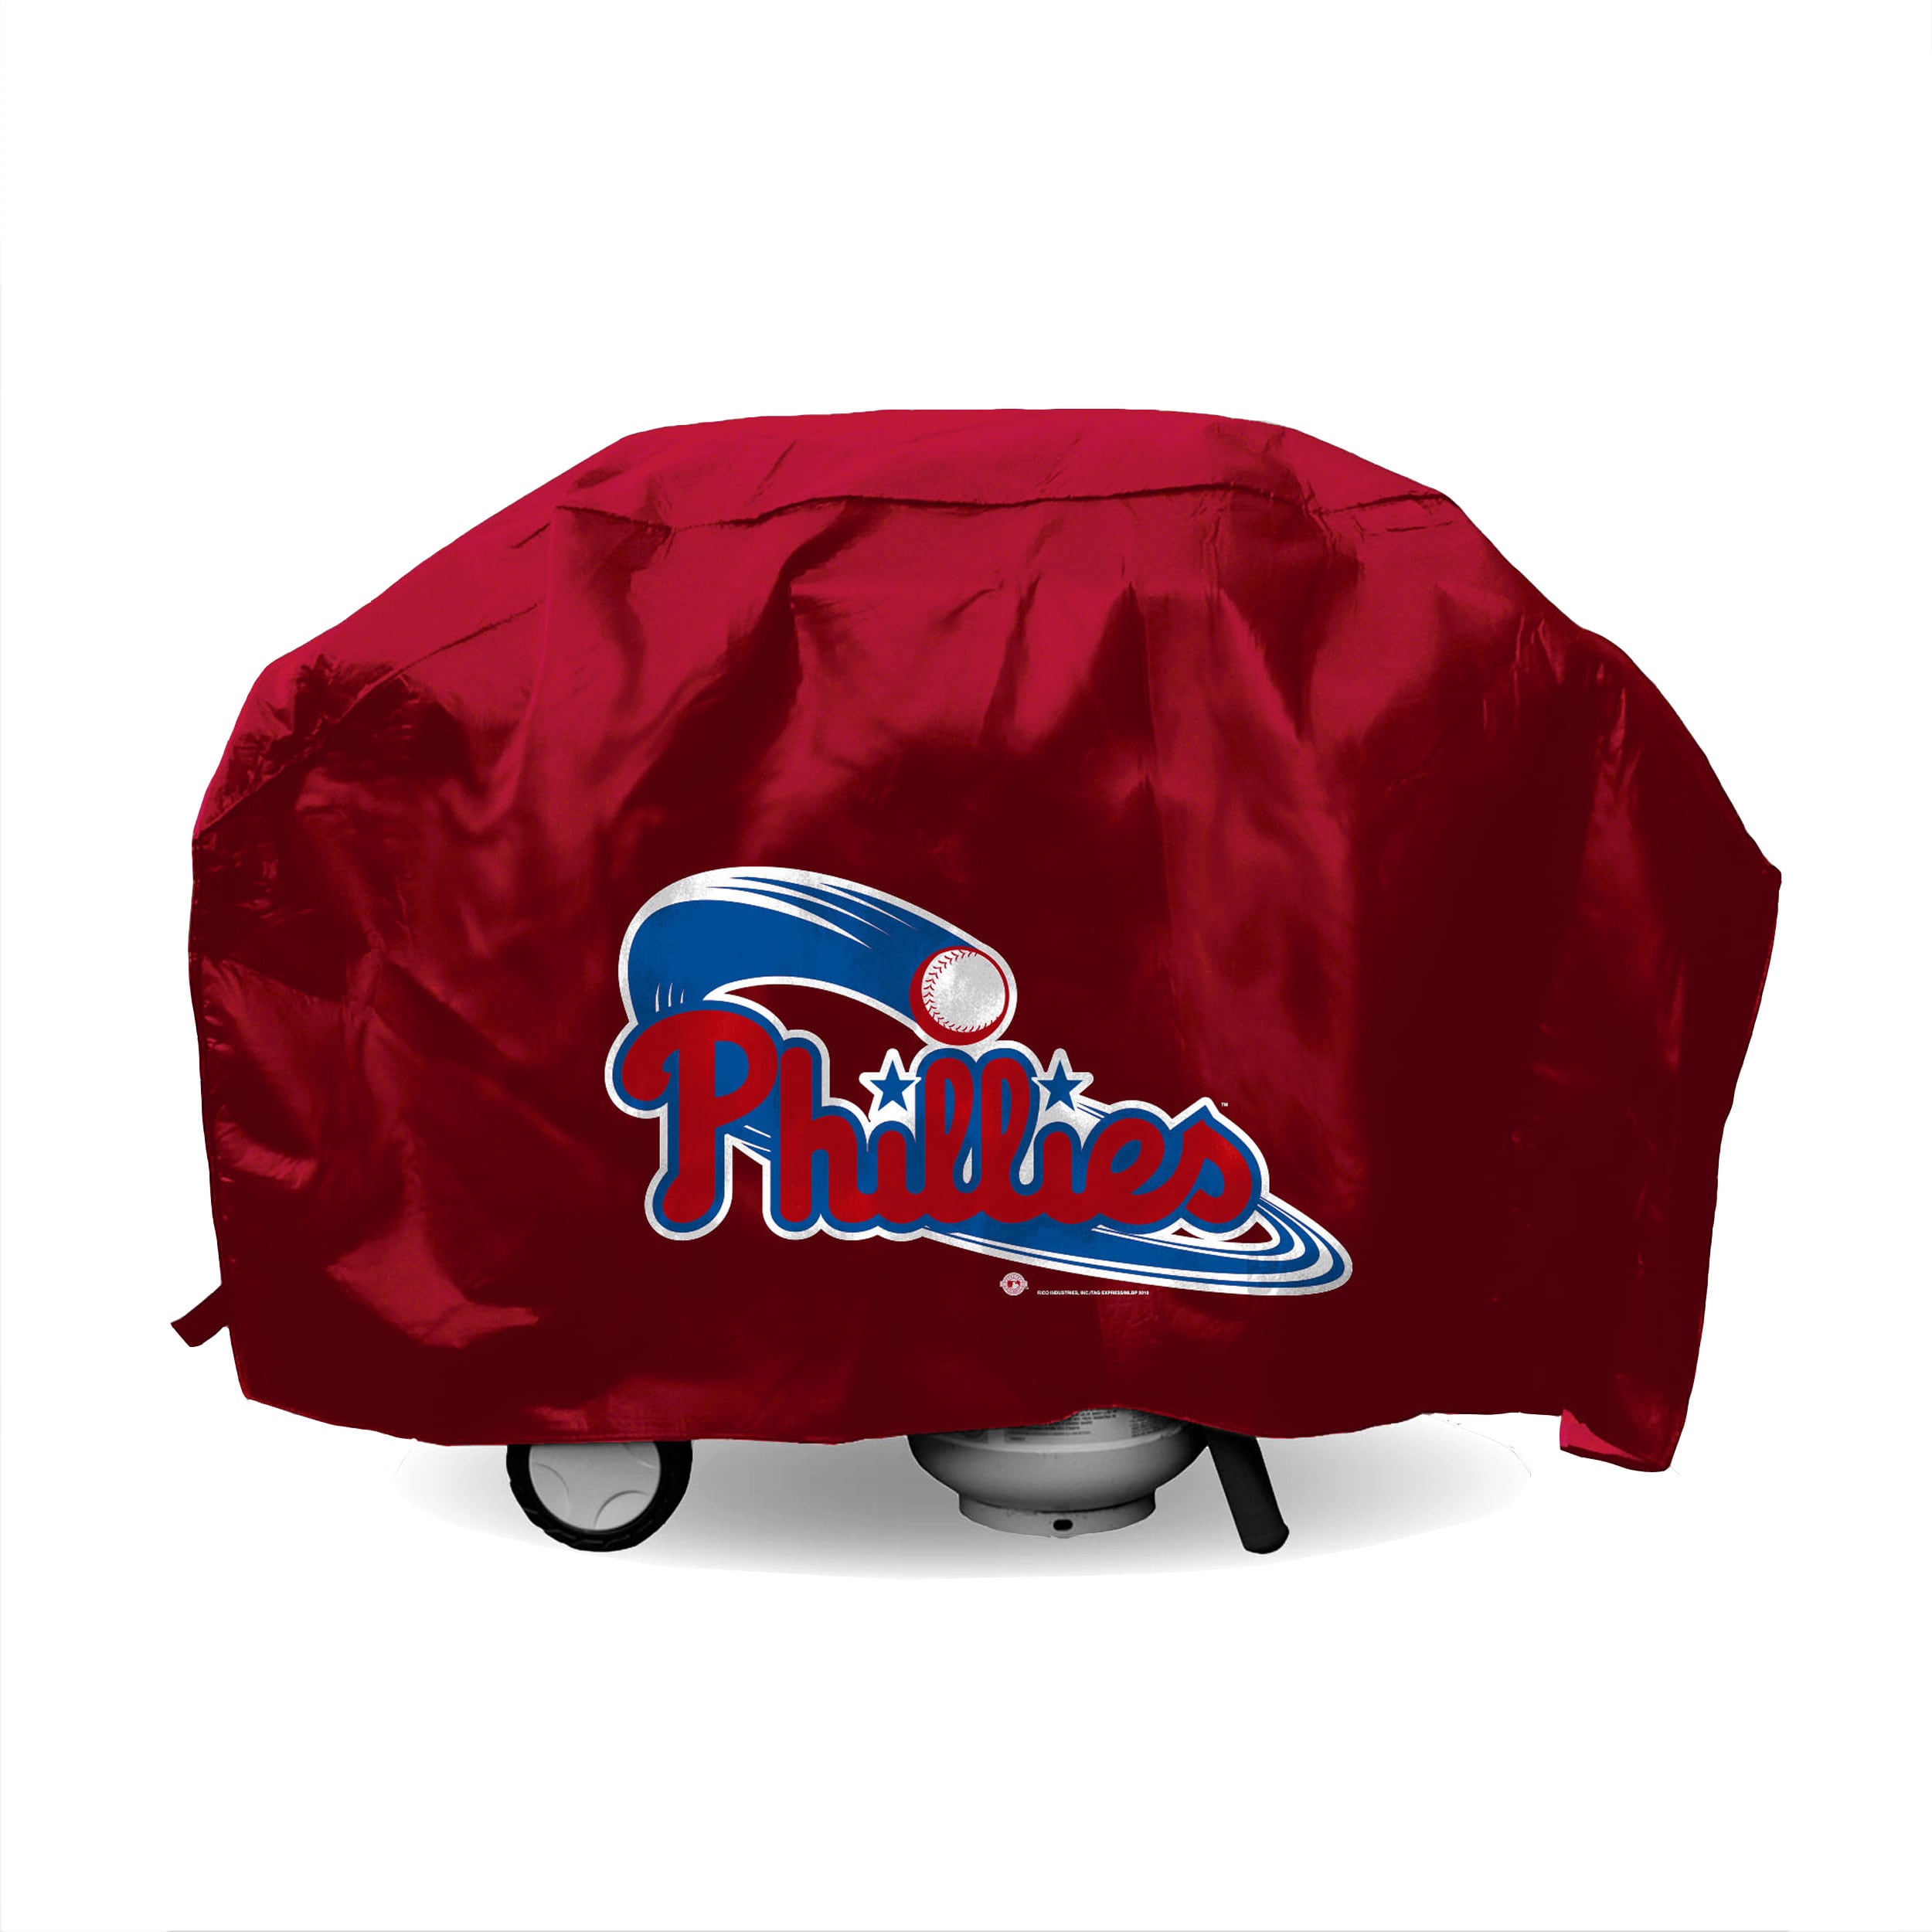 Rico Industries Phillies Vinyl Grill Cover - image 2 of 2